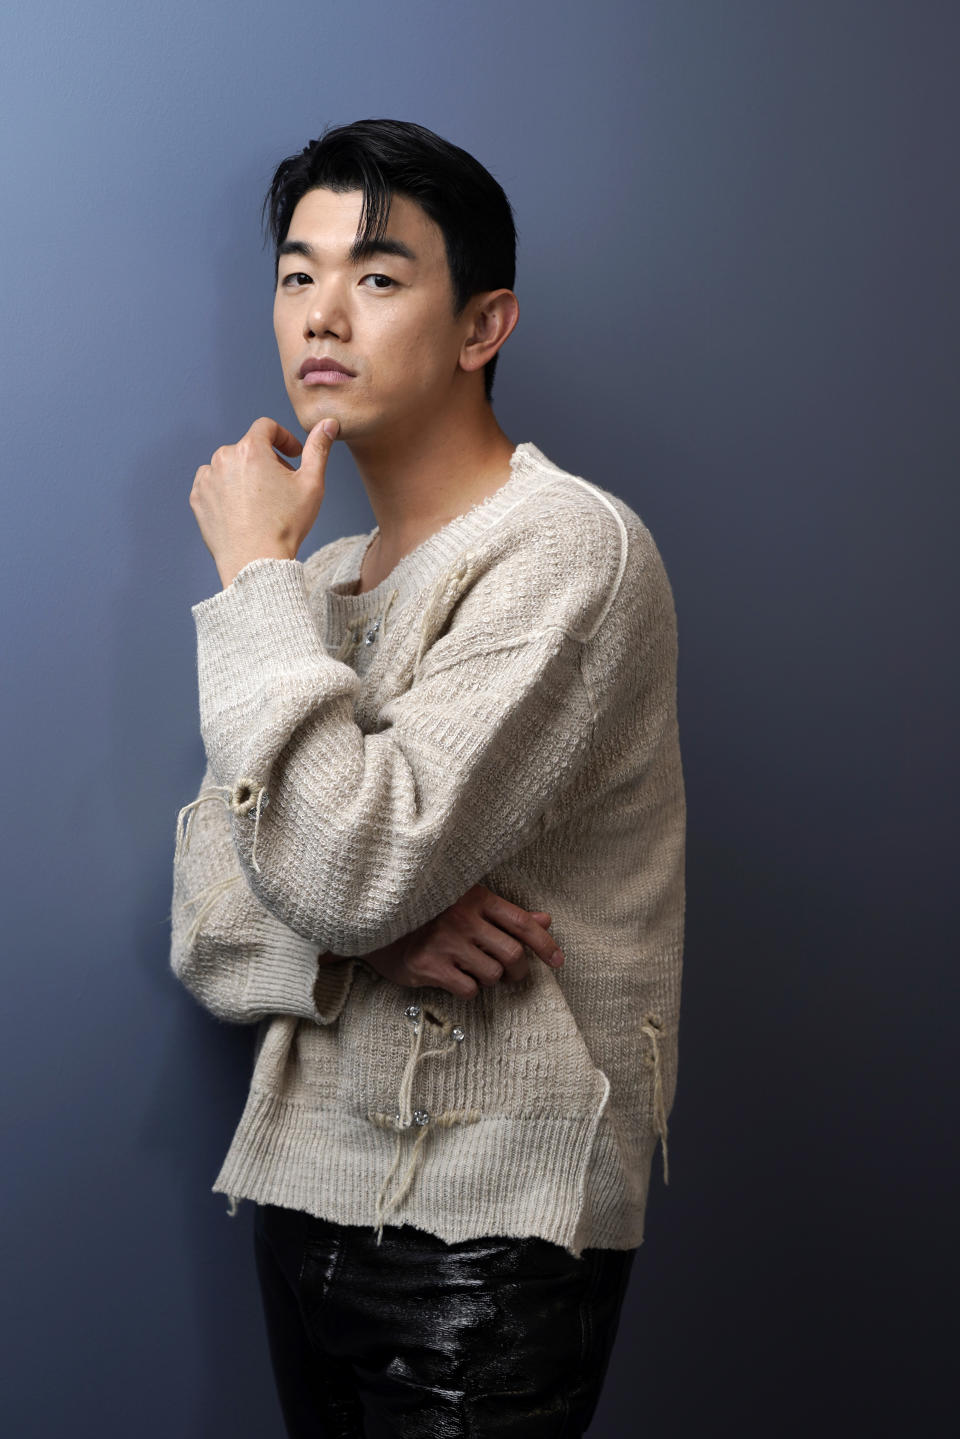 Singer/songwriter Eric Nam poses for a portrait, Tuesday, Aug. 22, 2023, in Los Angeles. (AP Photo/Chris Pizzello)